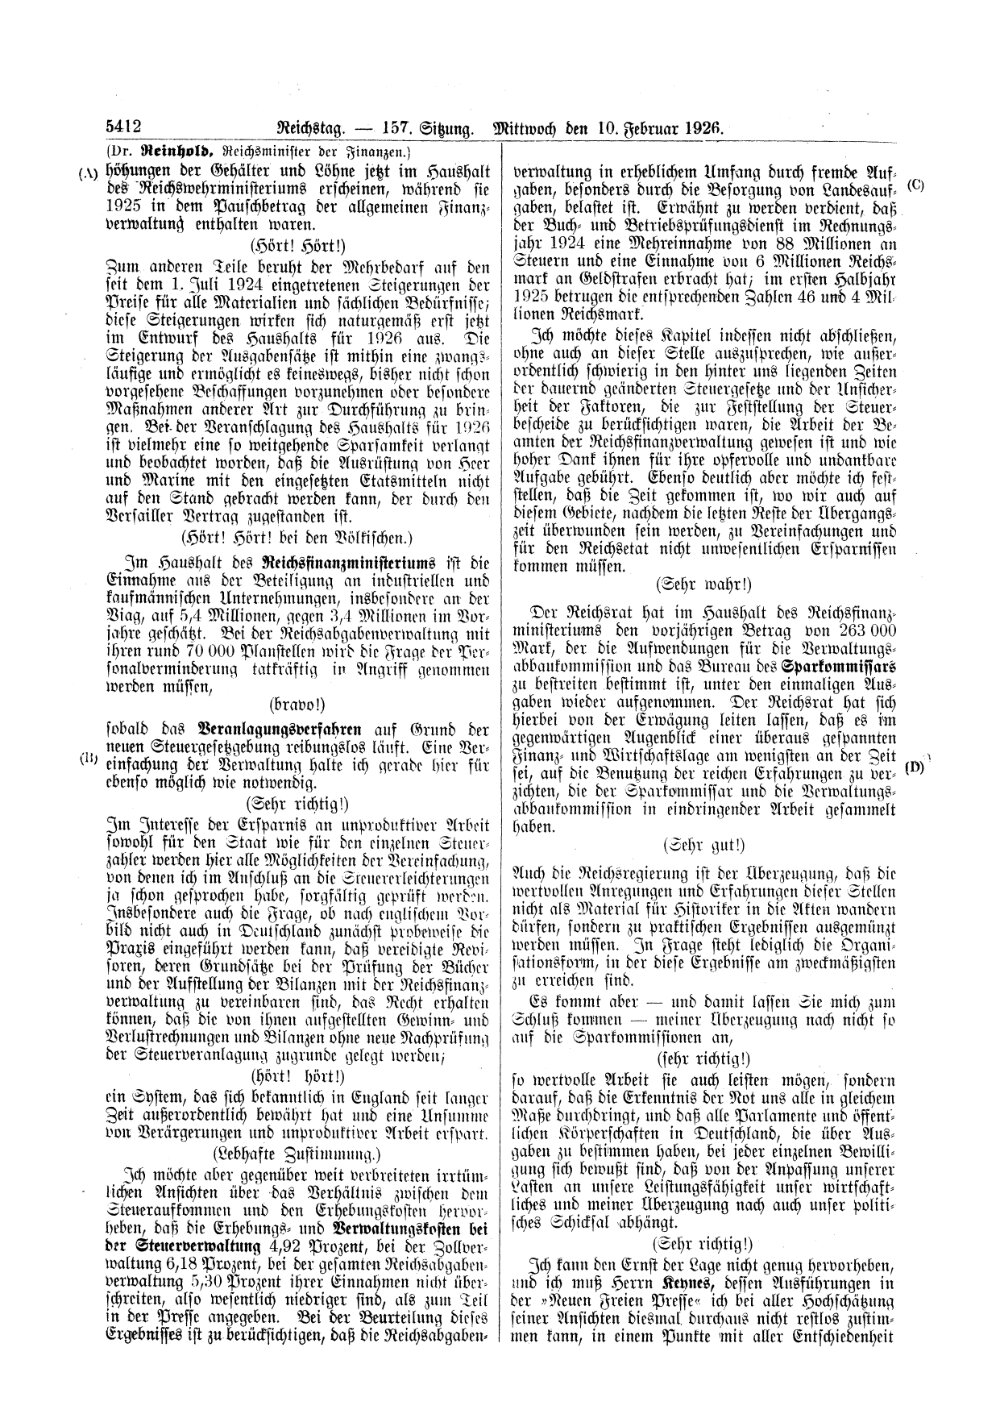 Scan of page 5412